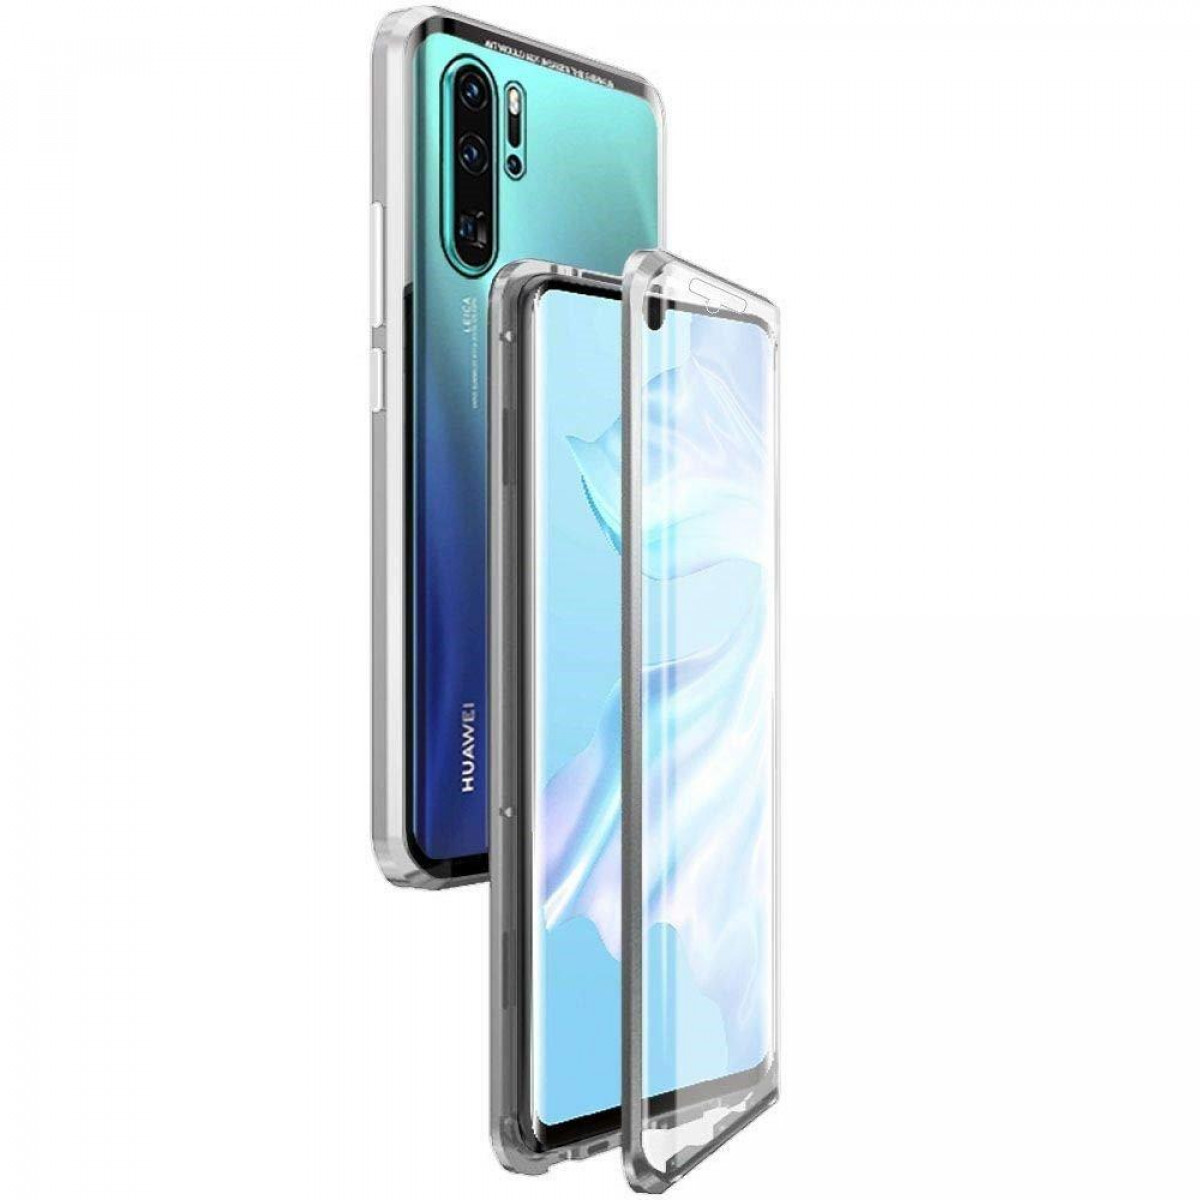 INF Huawei P30 Pro Full silbernem Handyhülle Cover, Pro, Huawei, Glas, Rahmen transparent mit magnetisch P30